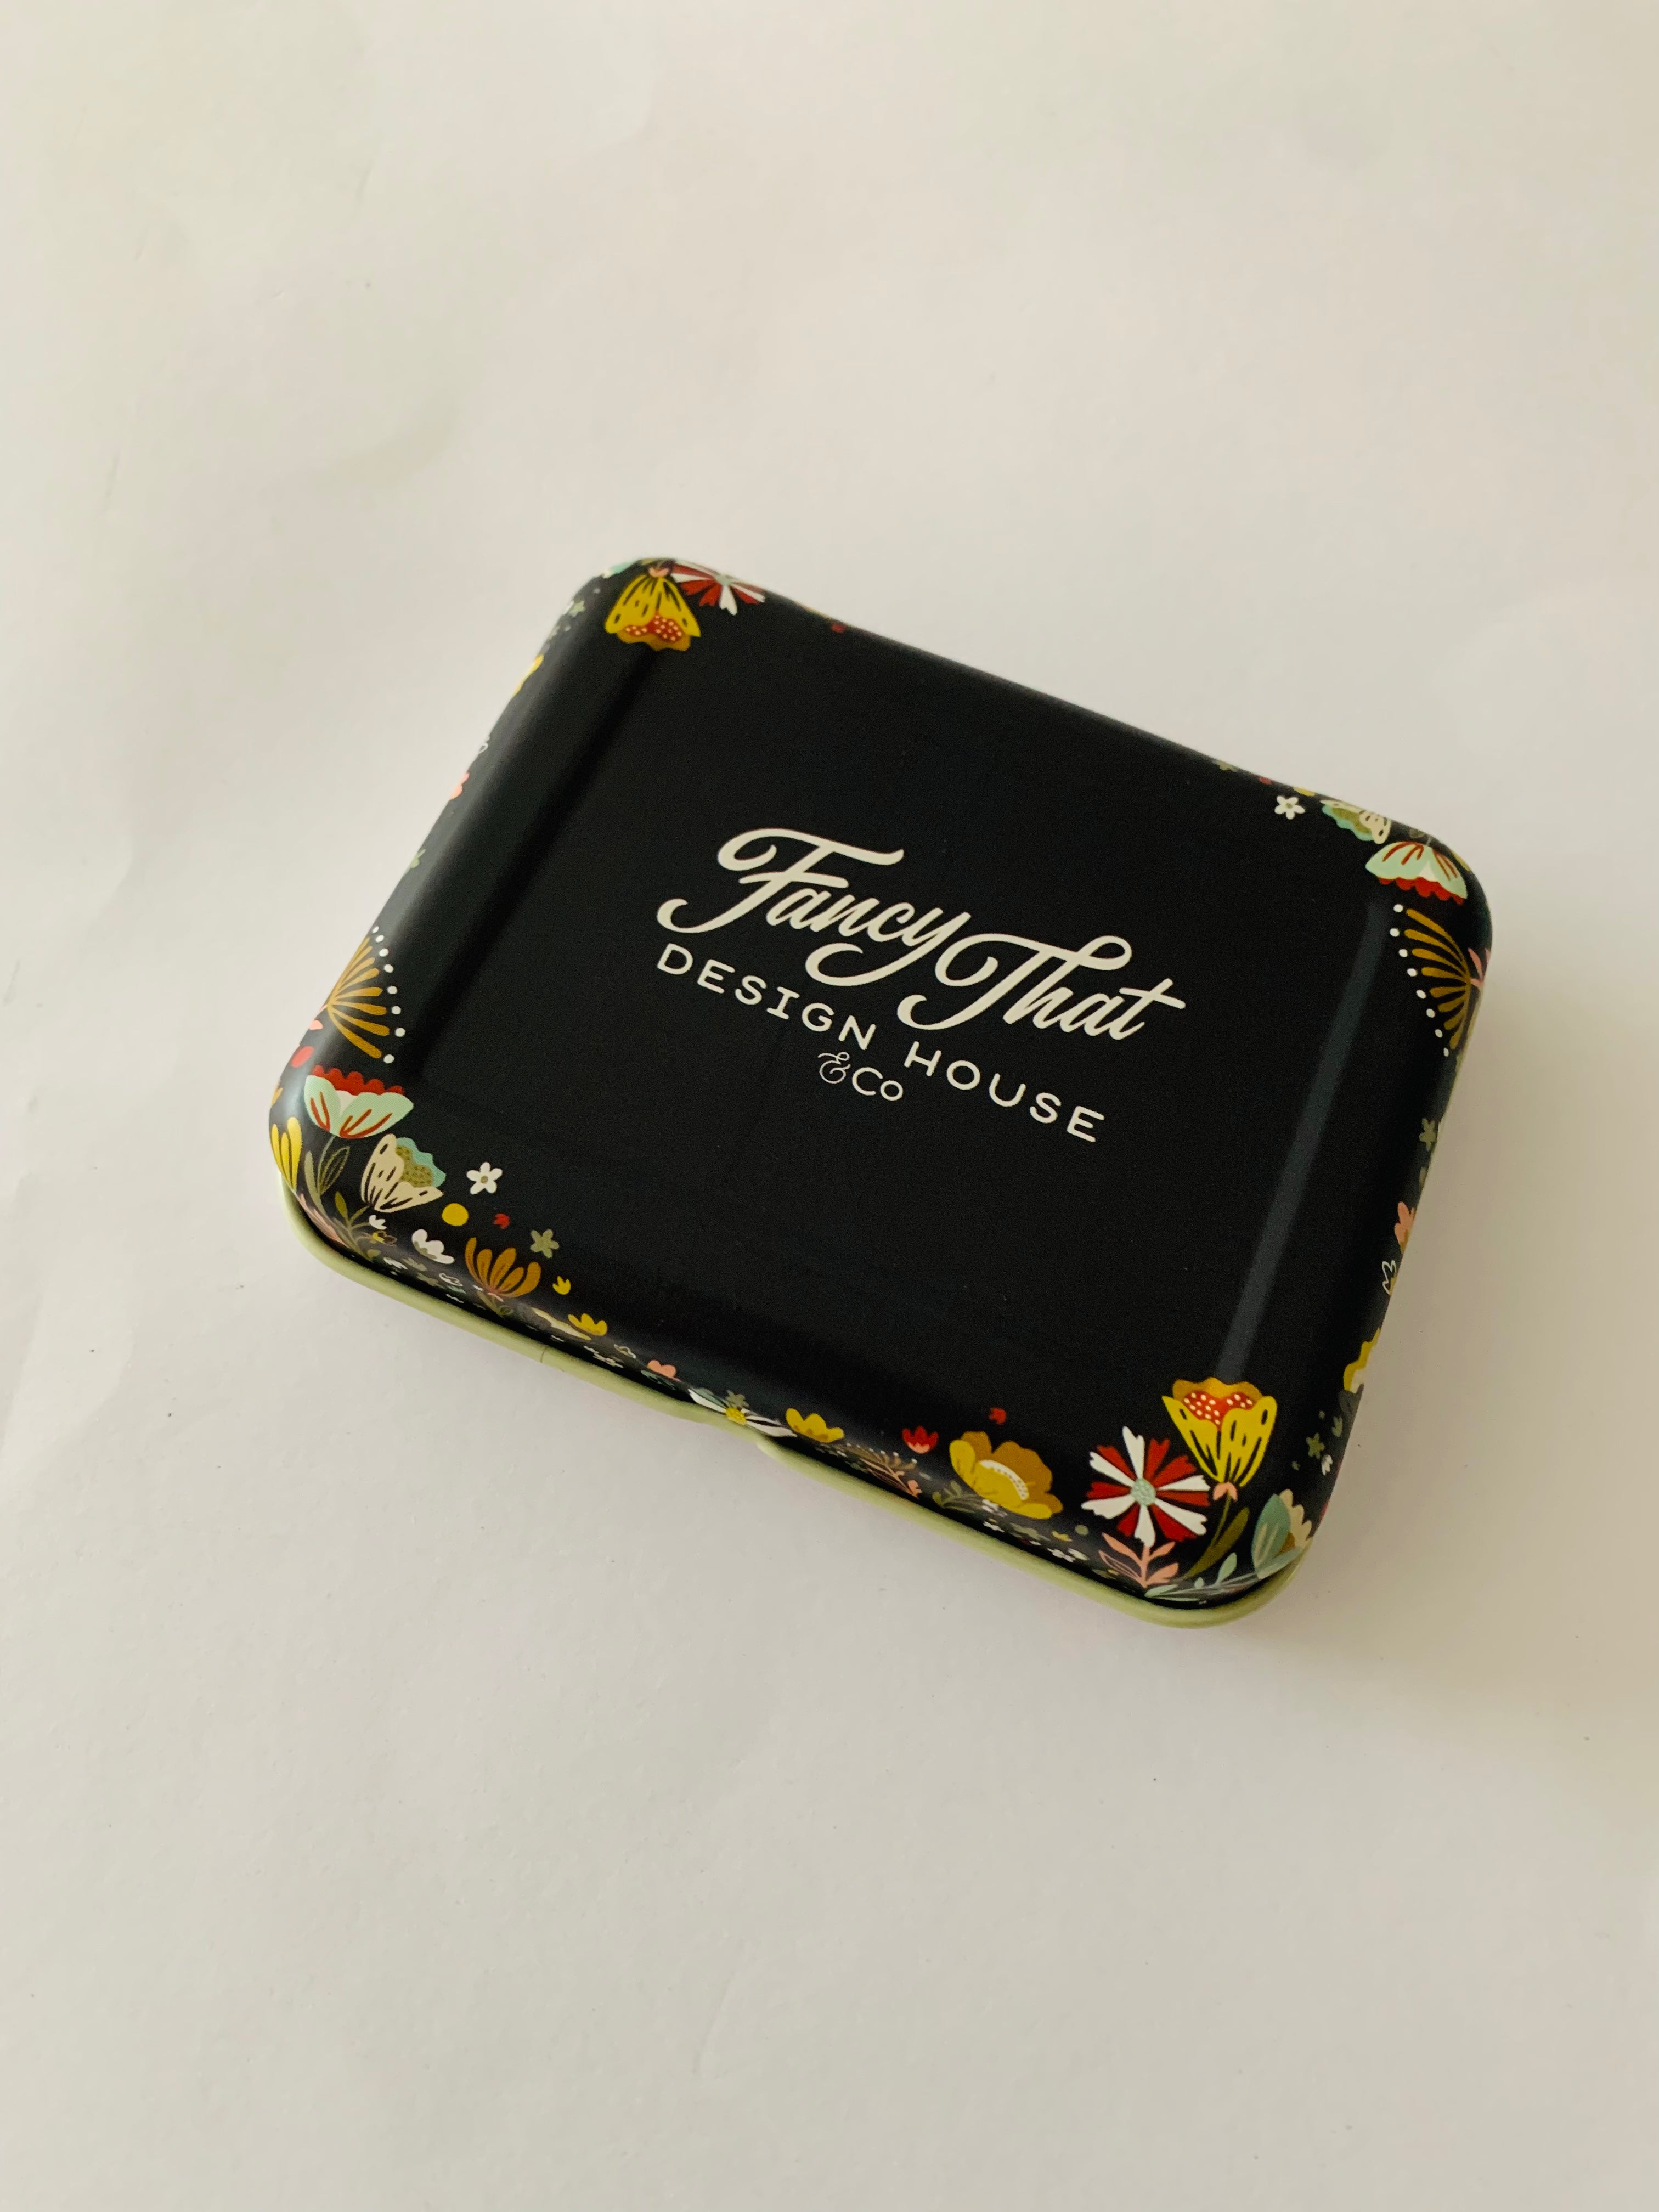 Moda/ Fancy That: Small floral tin